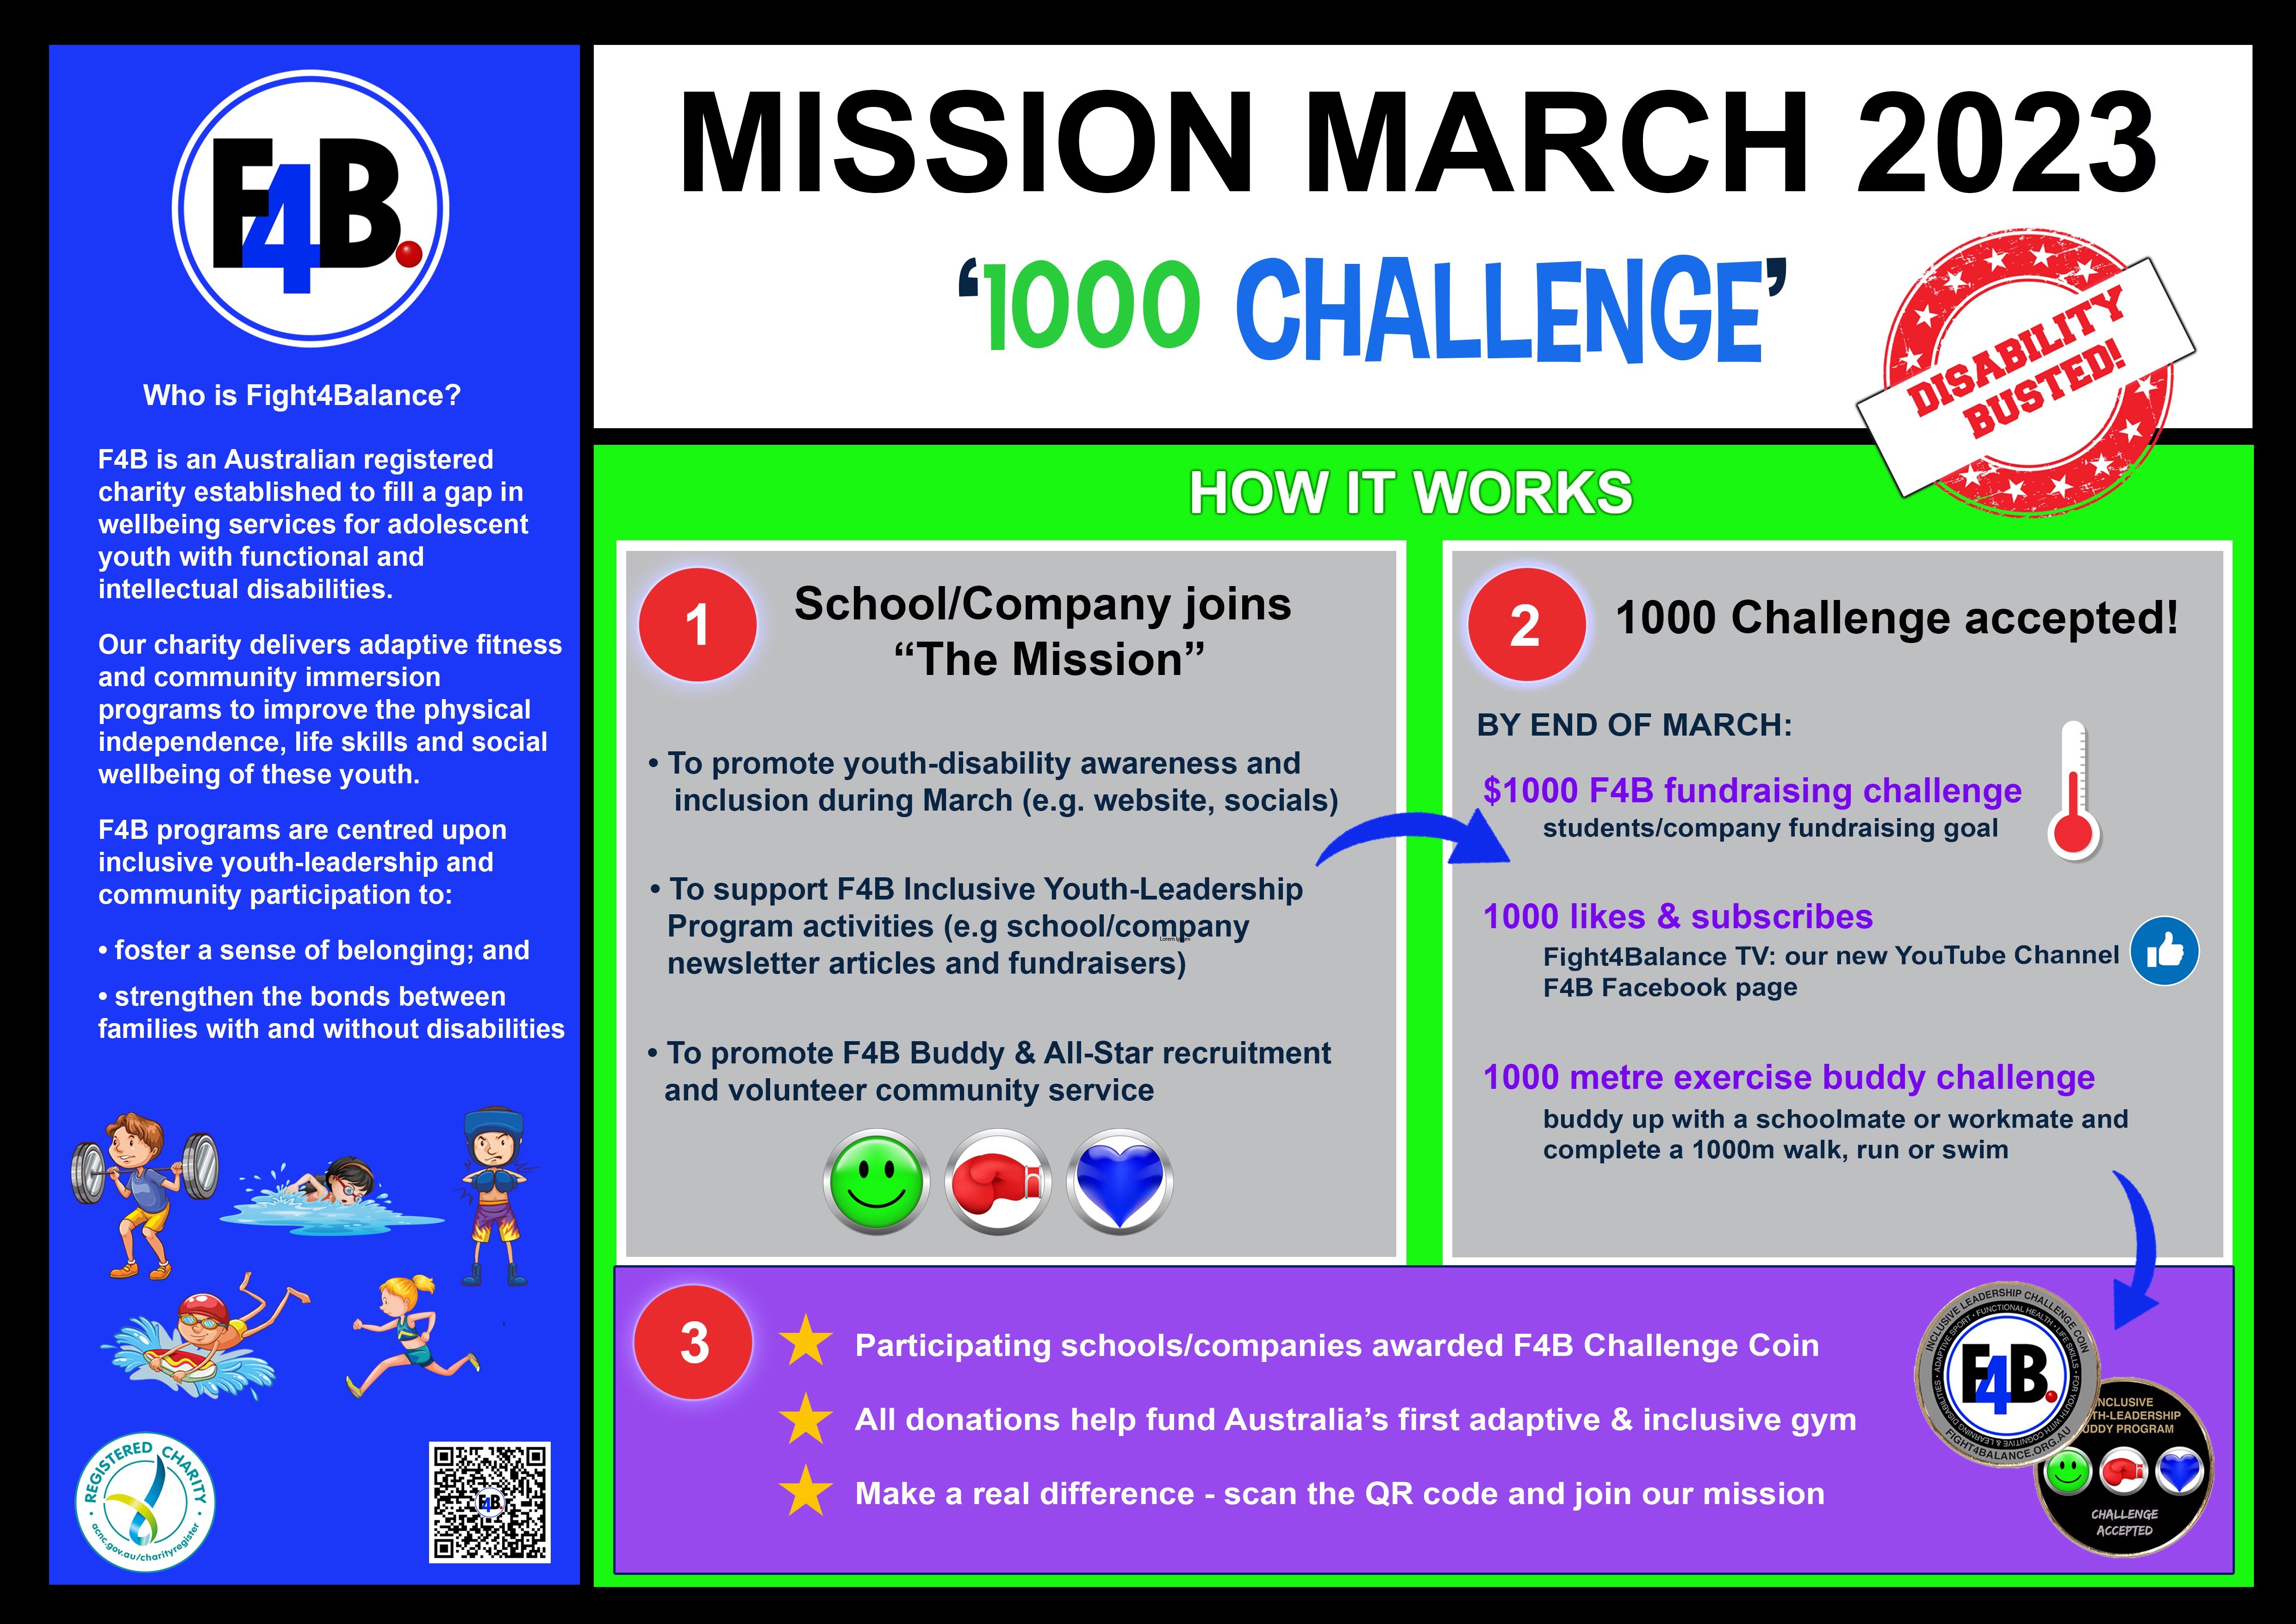 MISSION MARCH 2021 is launched!